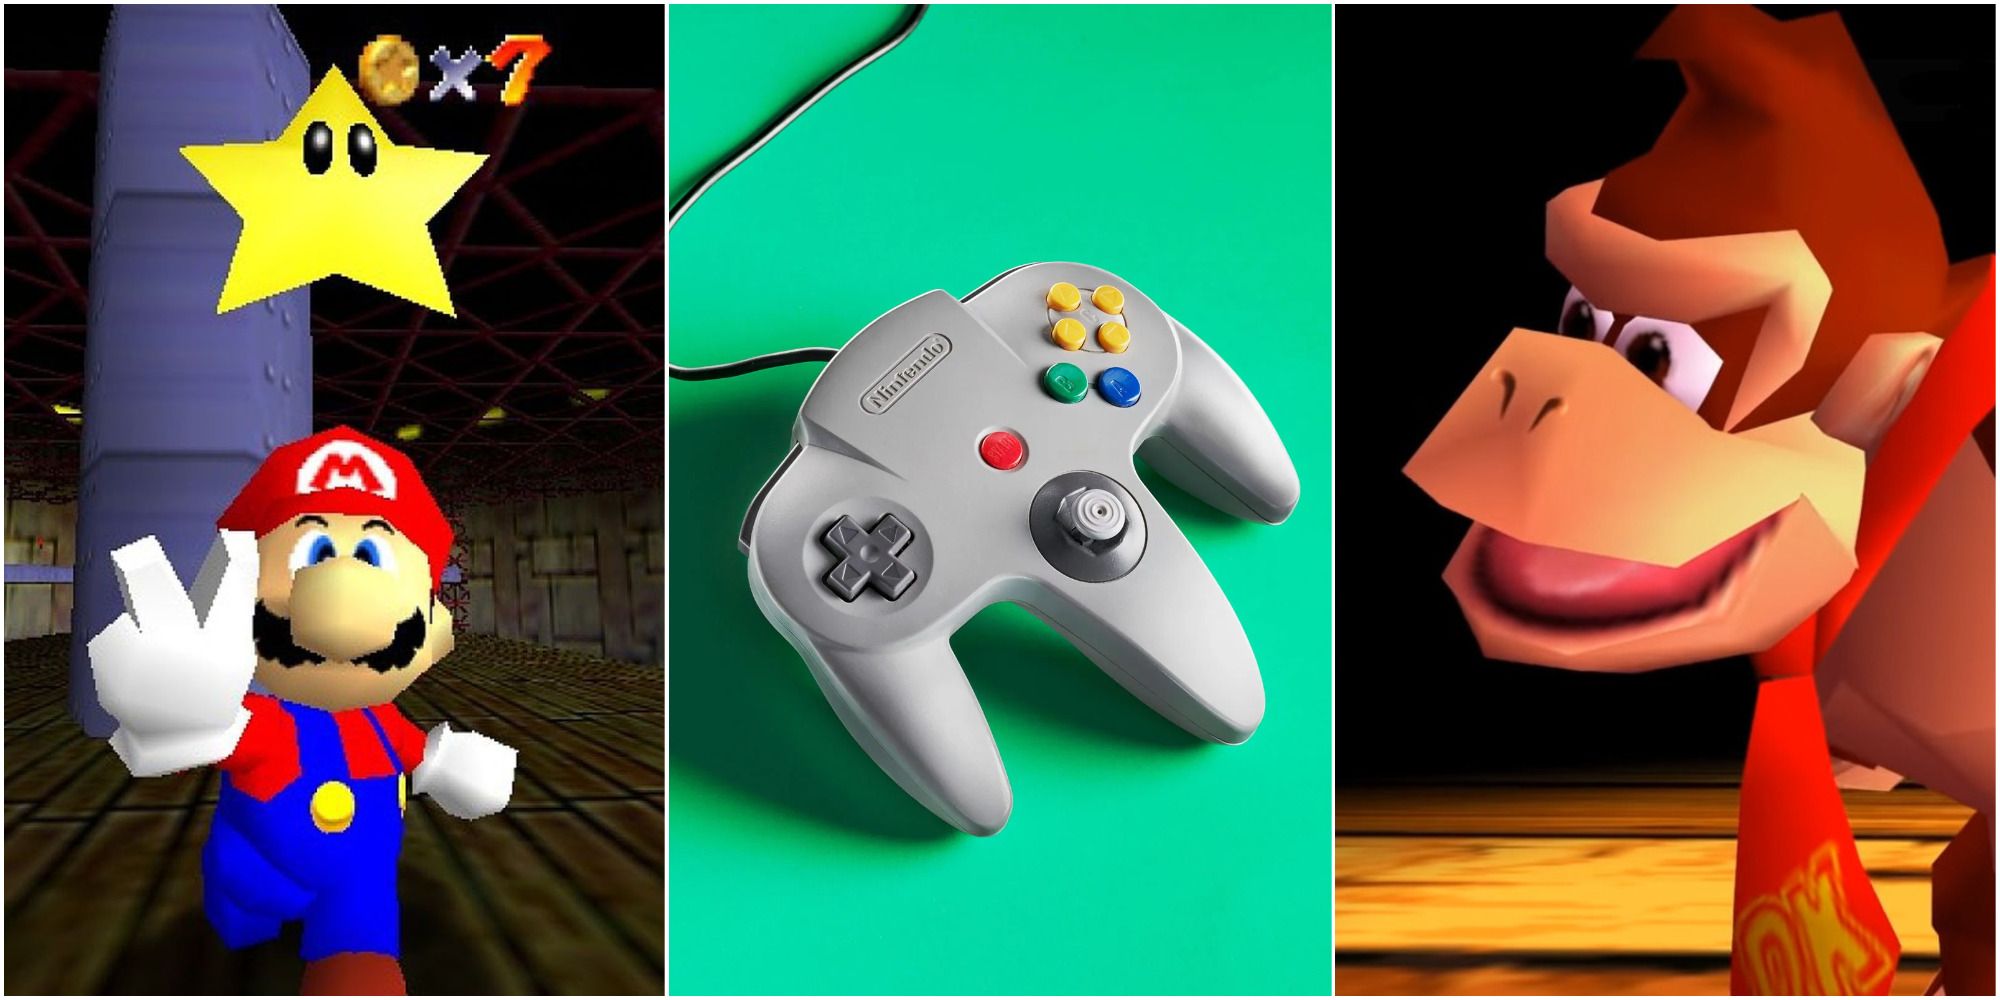 An N64 controller between Donkey Kong 64 and Super Mario 64